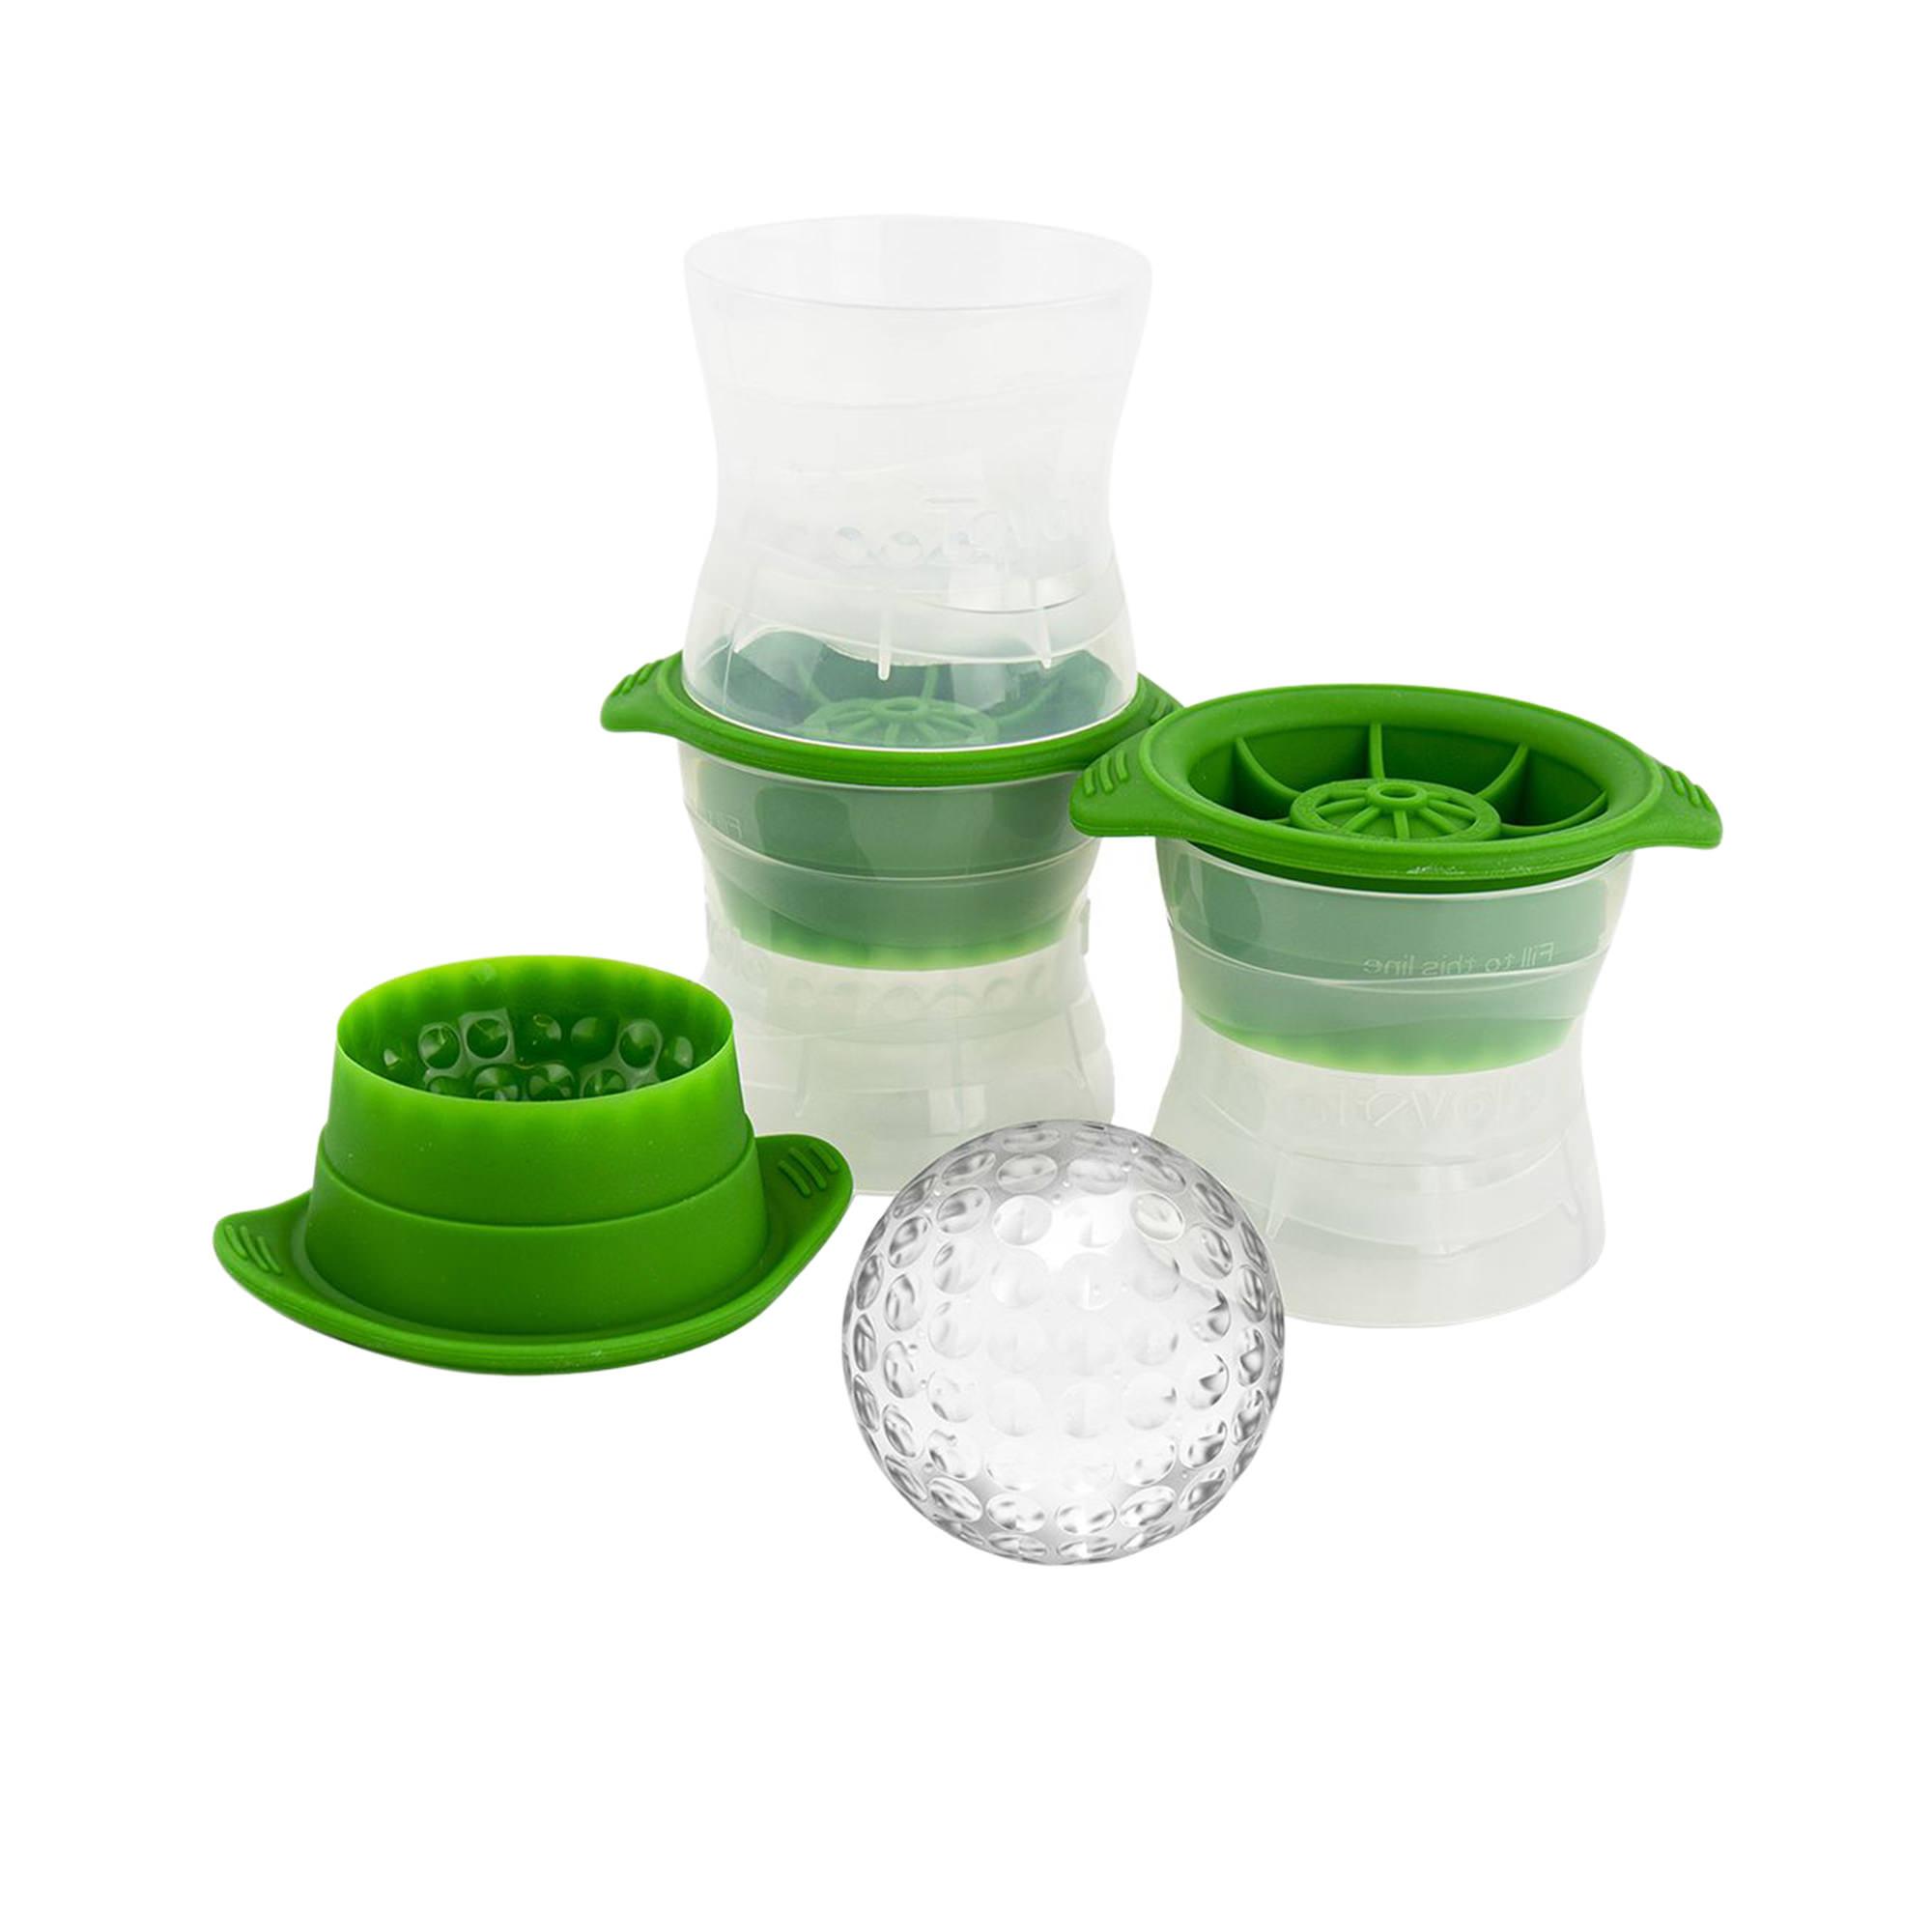 Tovolo Golf Ball Ice Mould Set of 3 Green Image 1